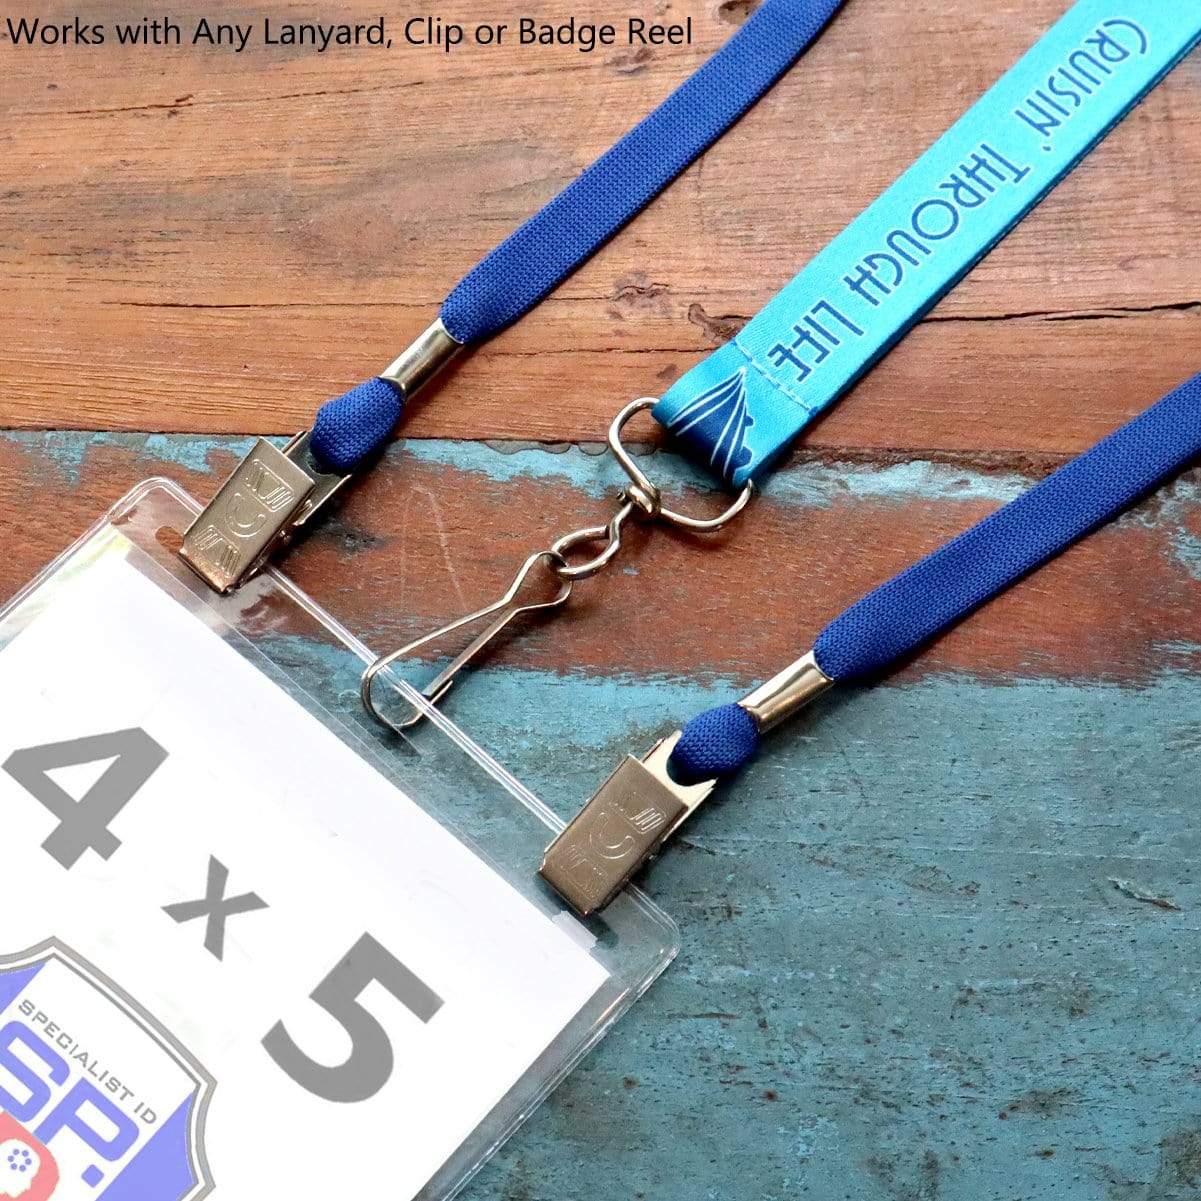 4x5 Badge Holder for Large Event Tickets, Passes, Documents at